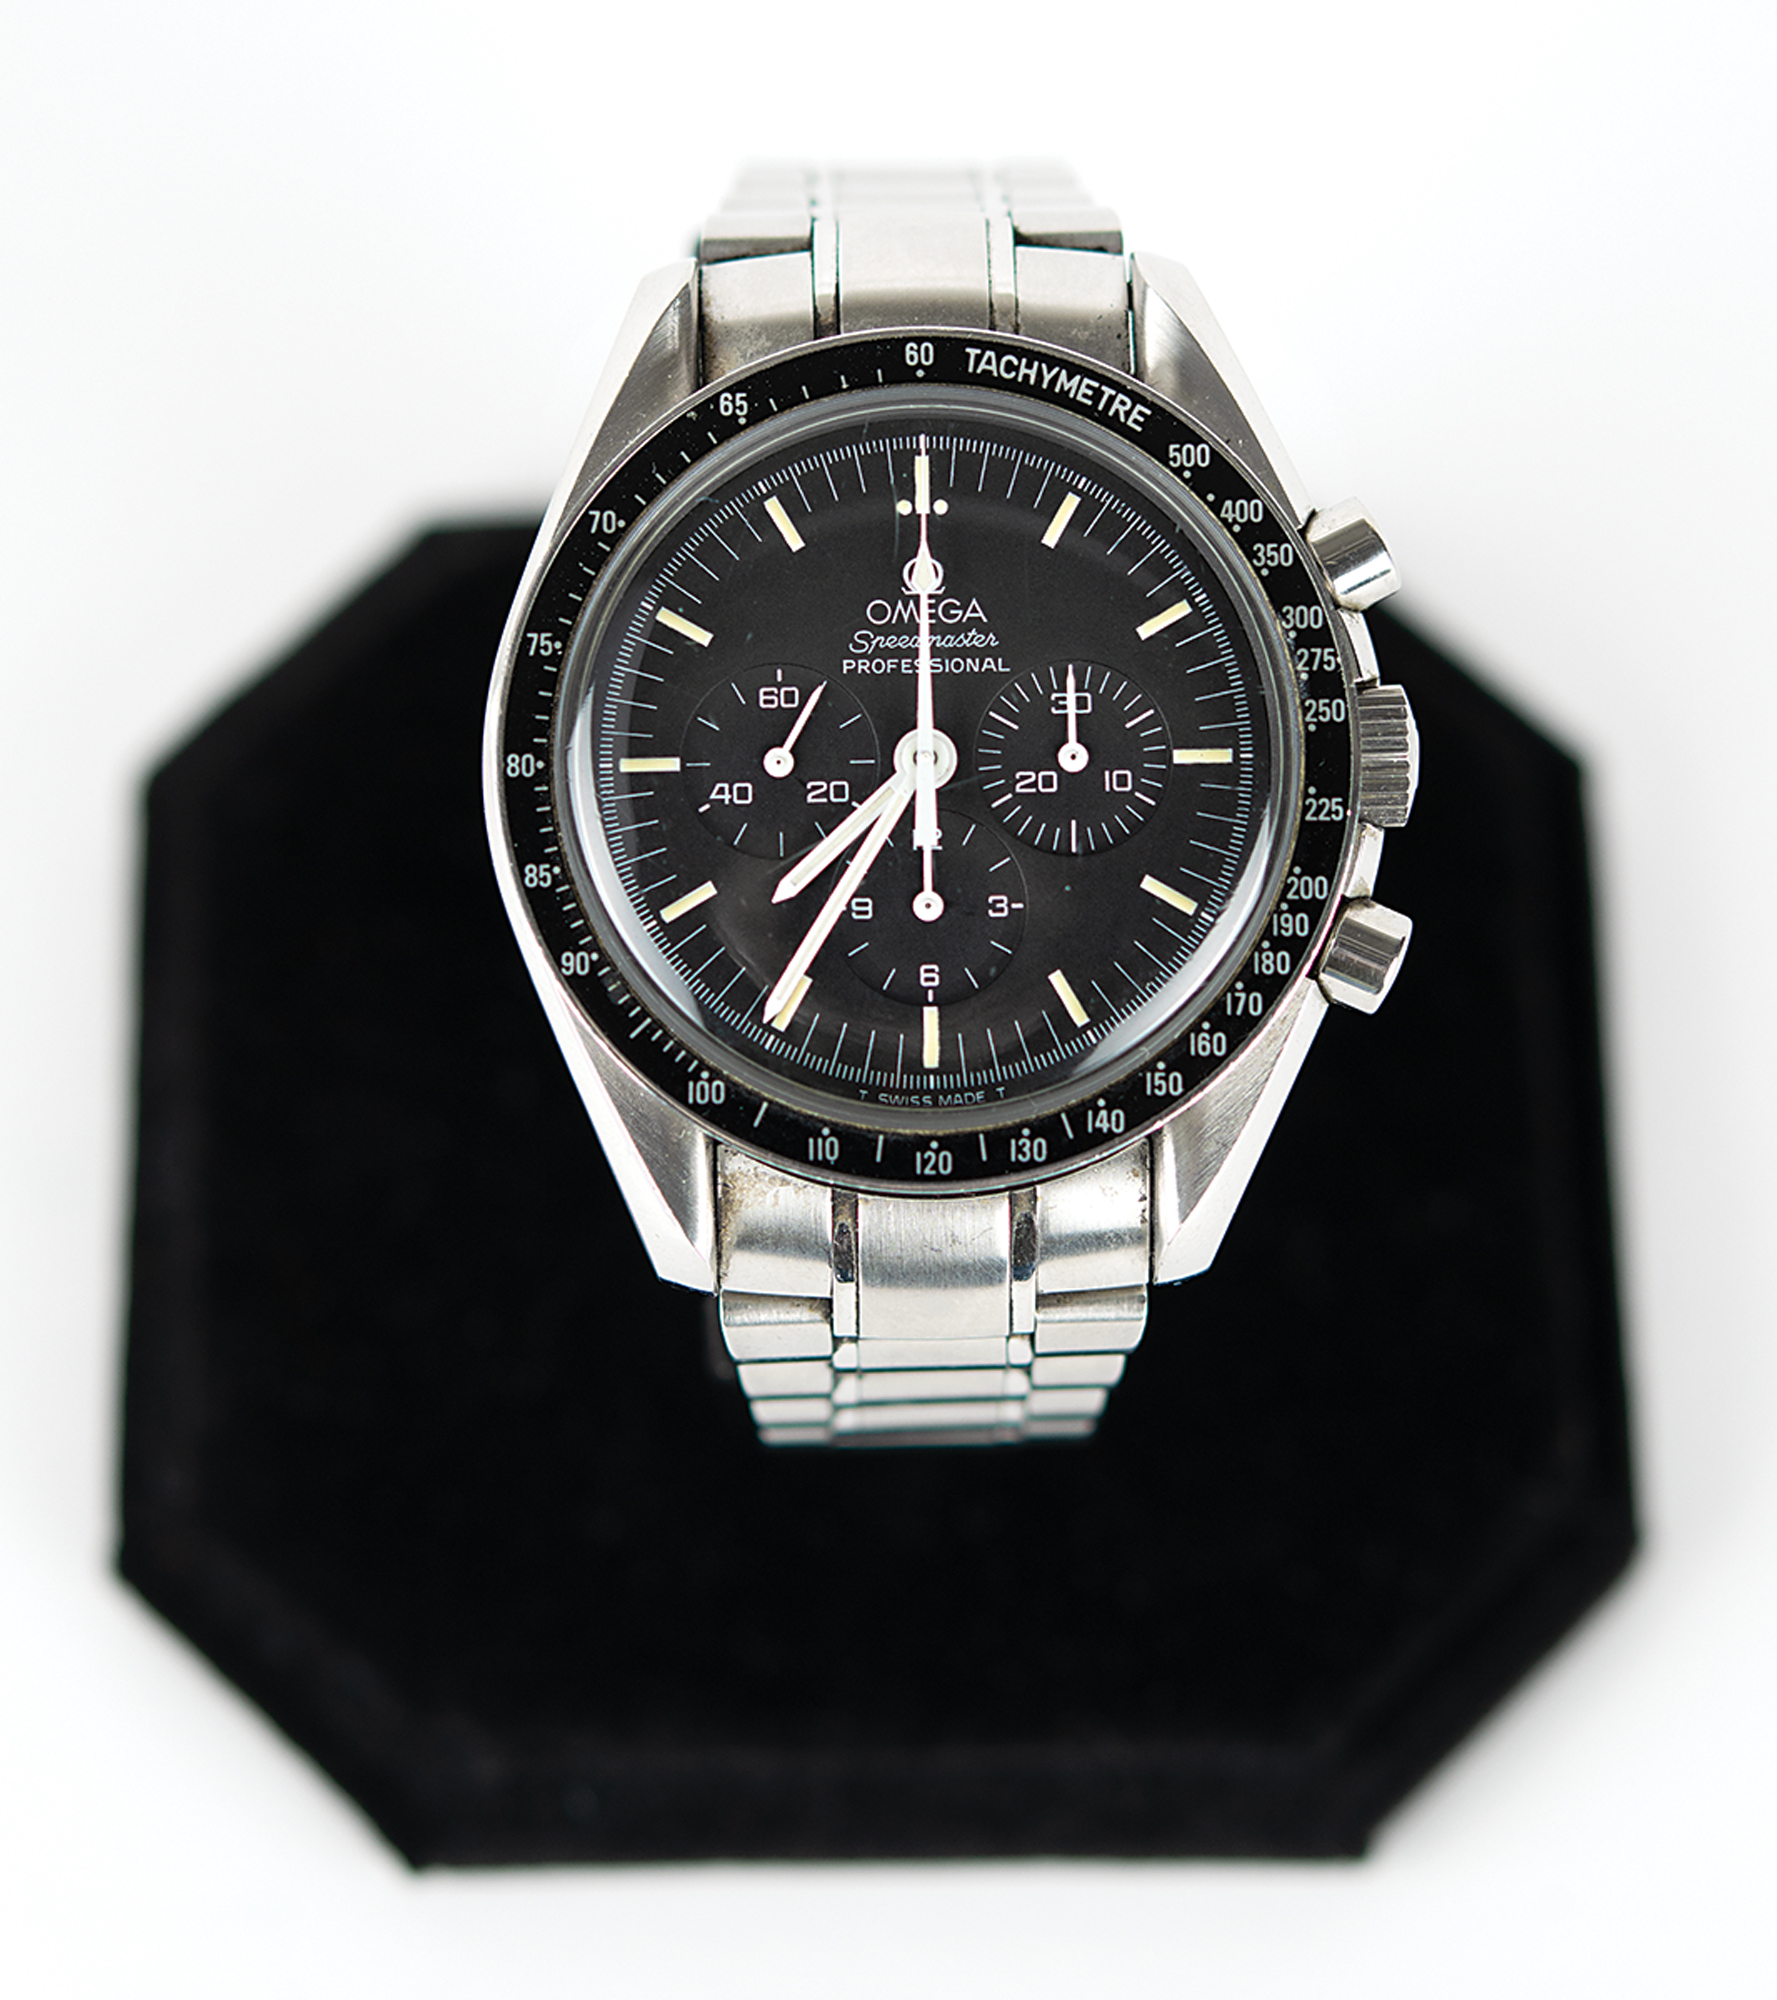 Lot #9006 Mir Flown Omega Speedmaster Professional Chronograph (365 Days in Space)